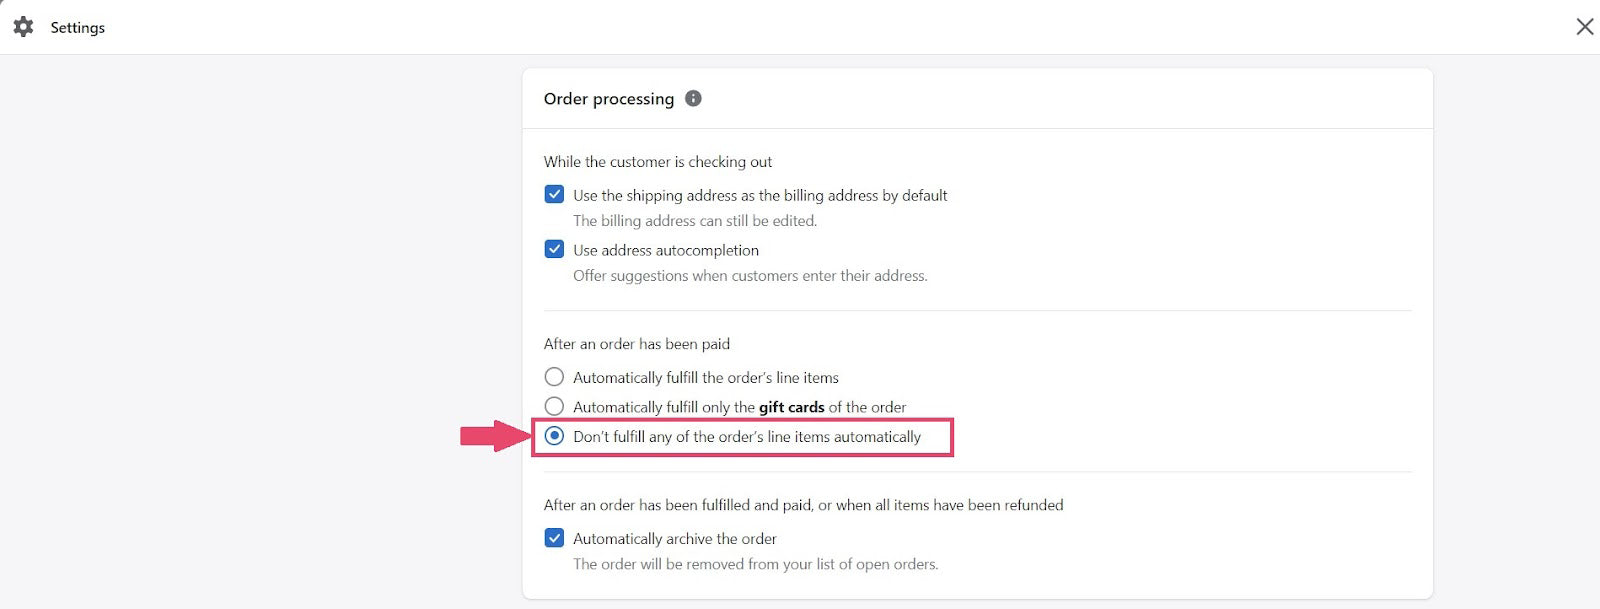 Shopify settings for order processing